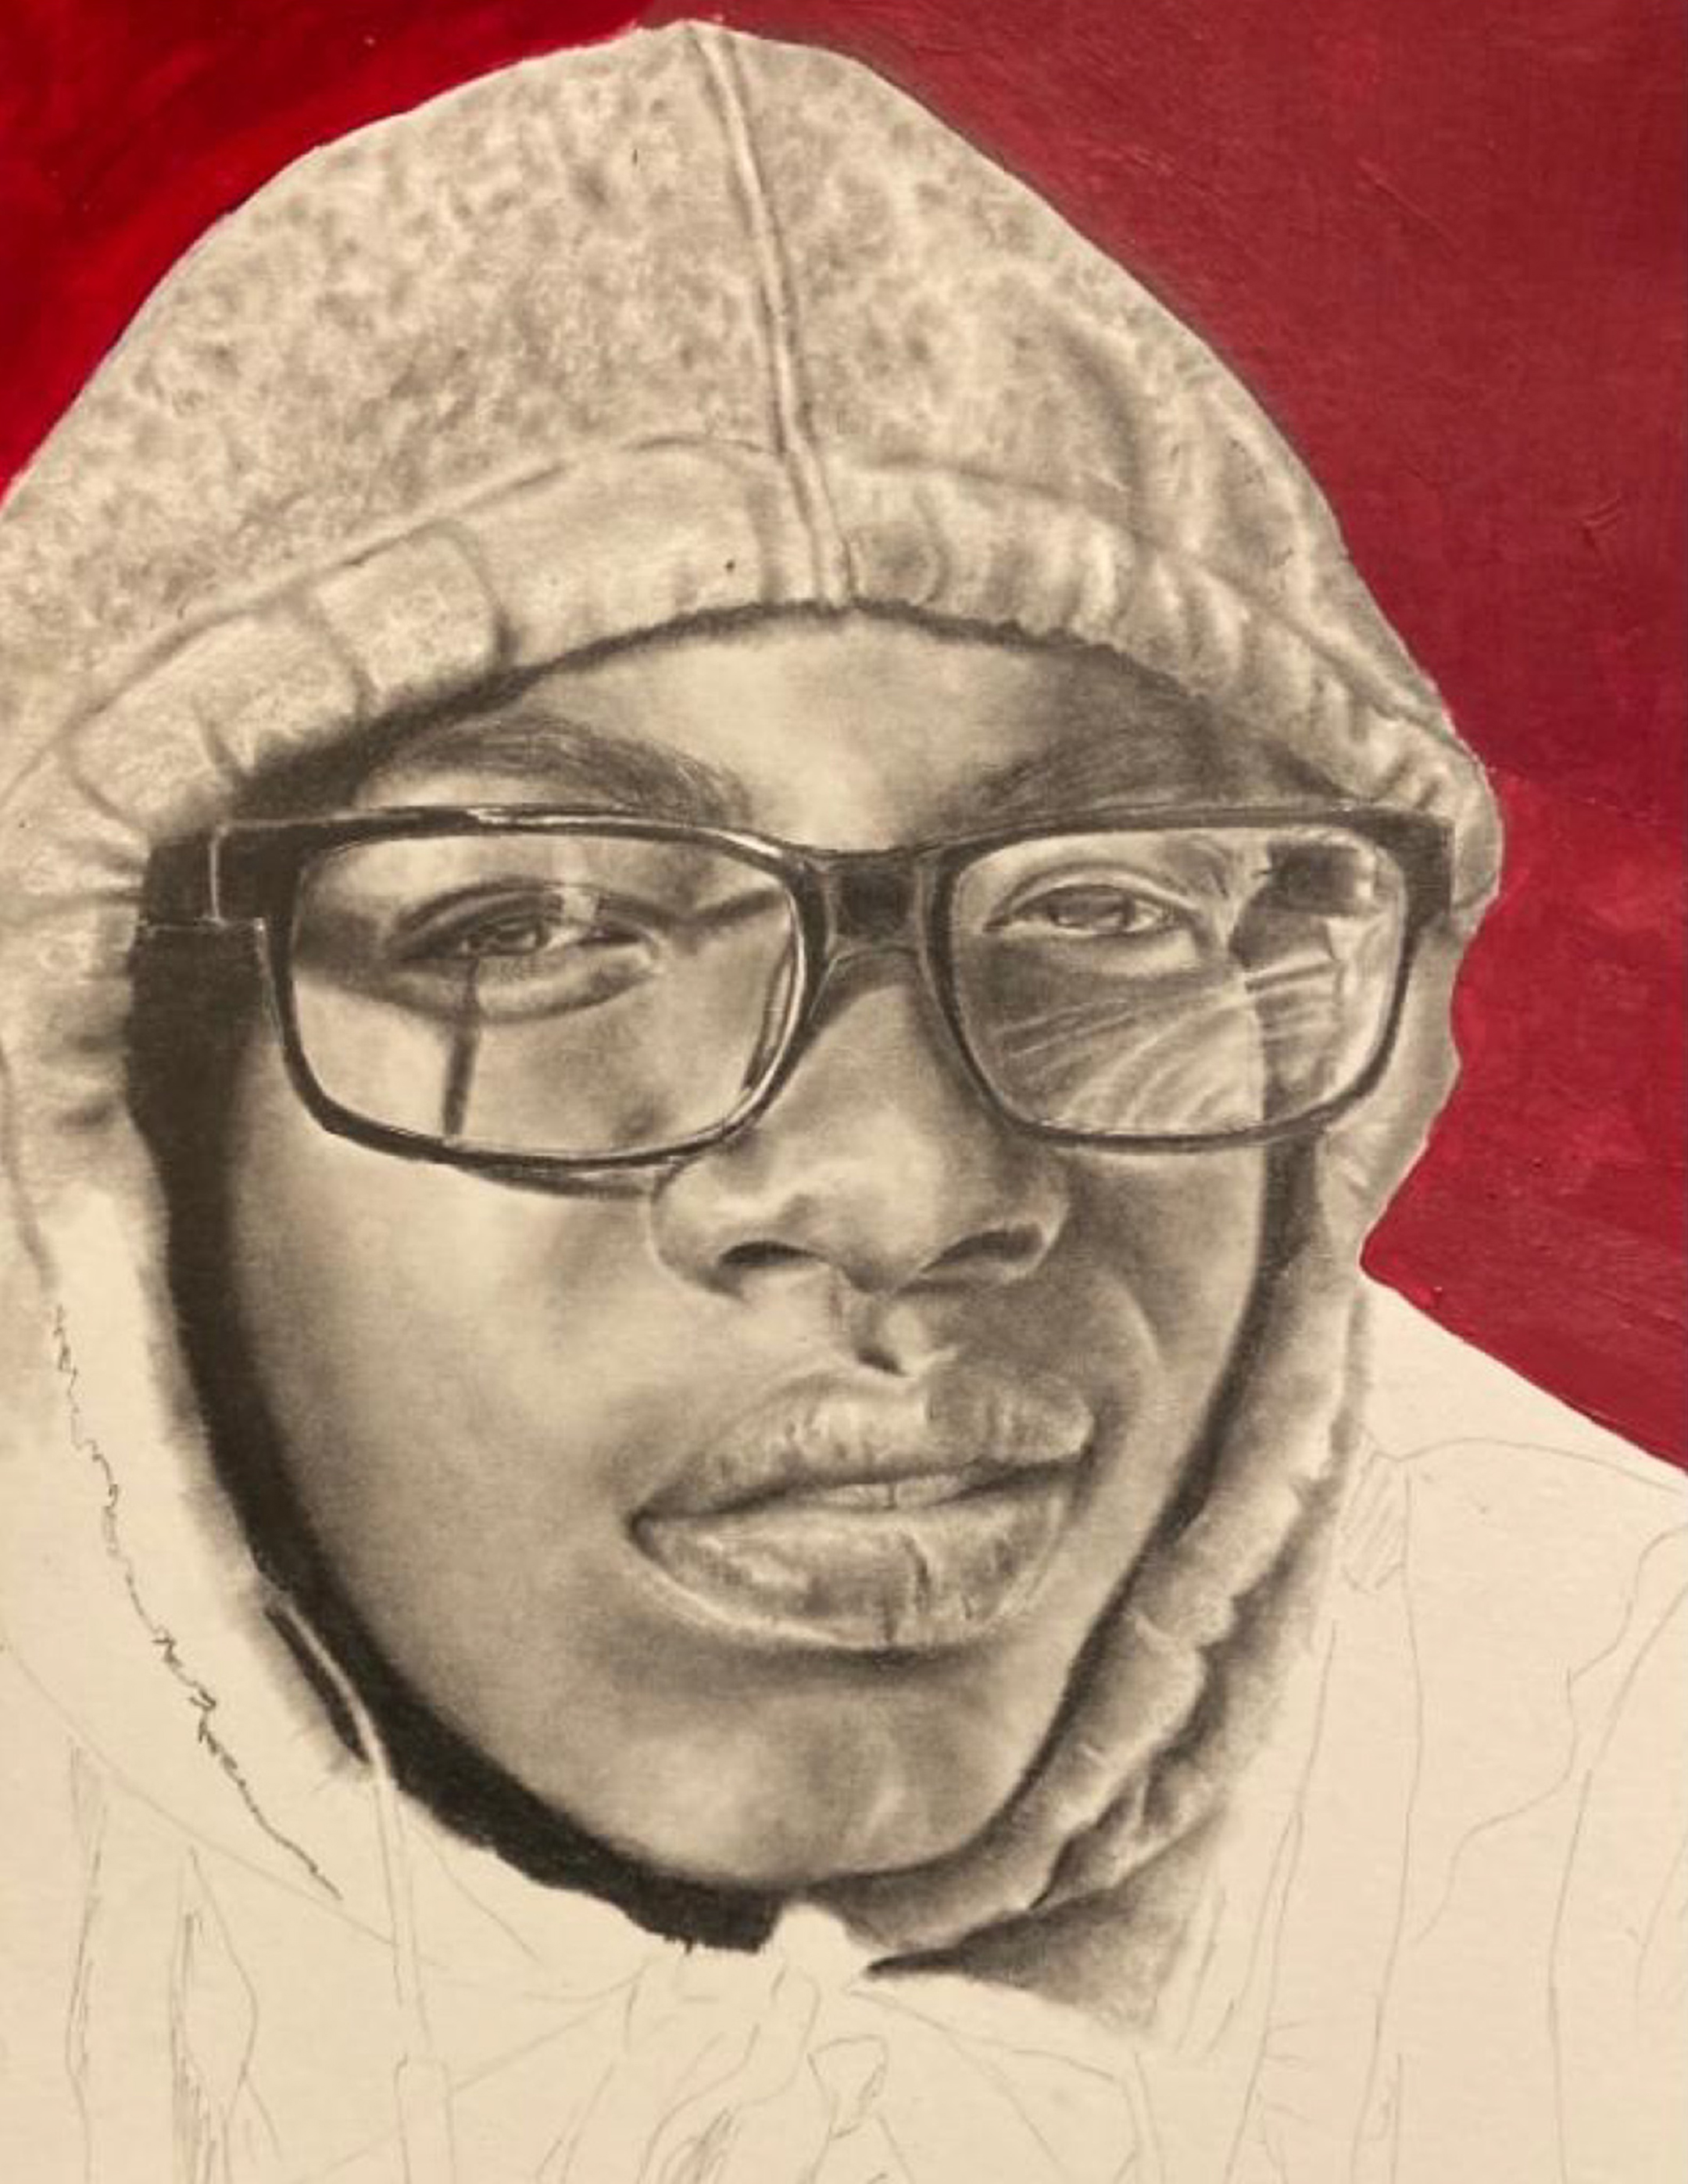 Black and white portrait of a young black man wearing glasses in a hoodie against a red background